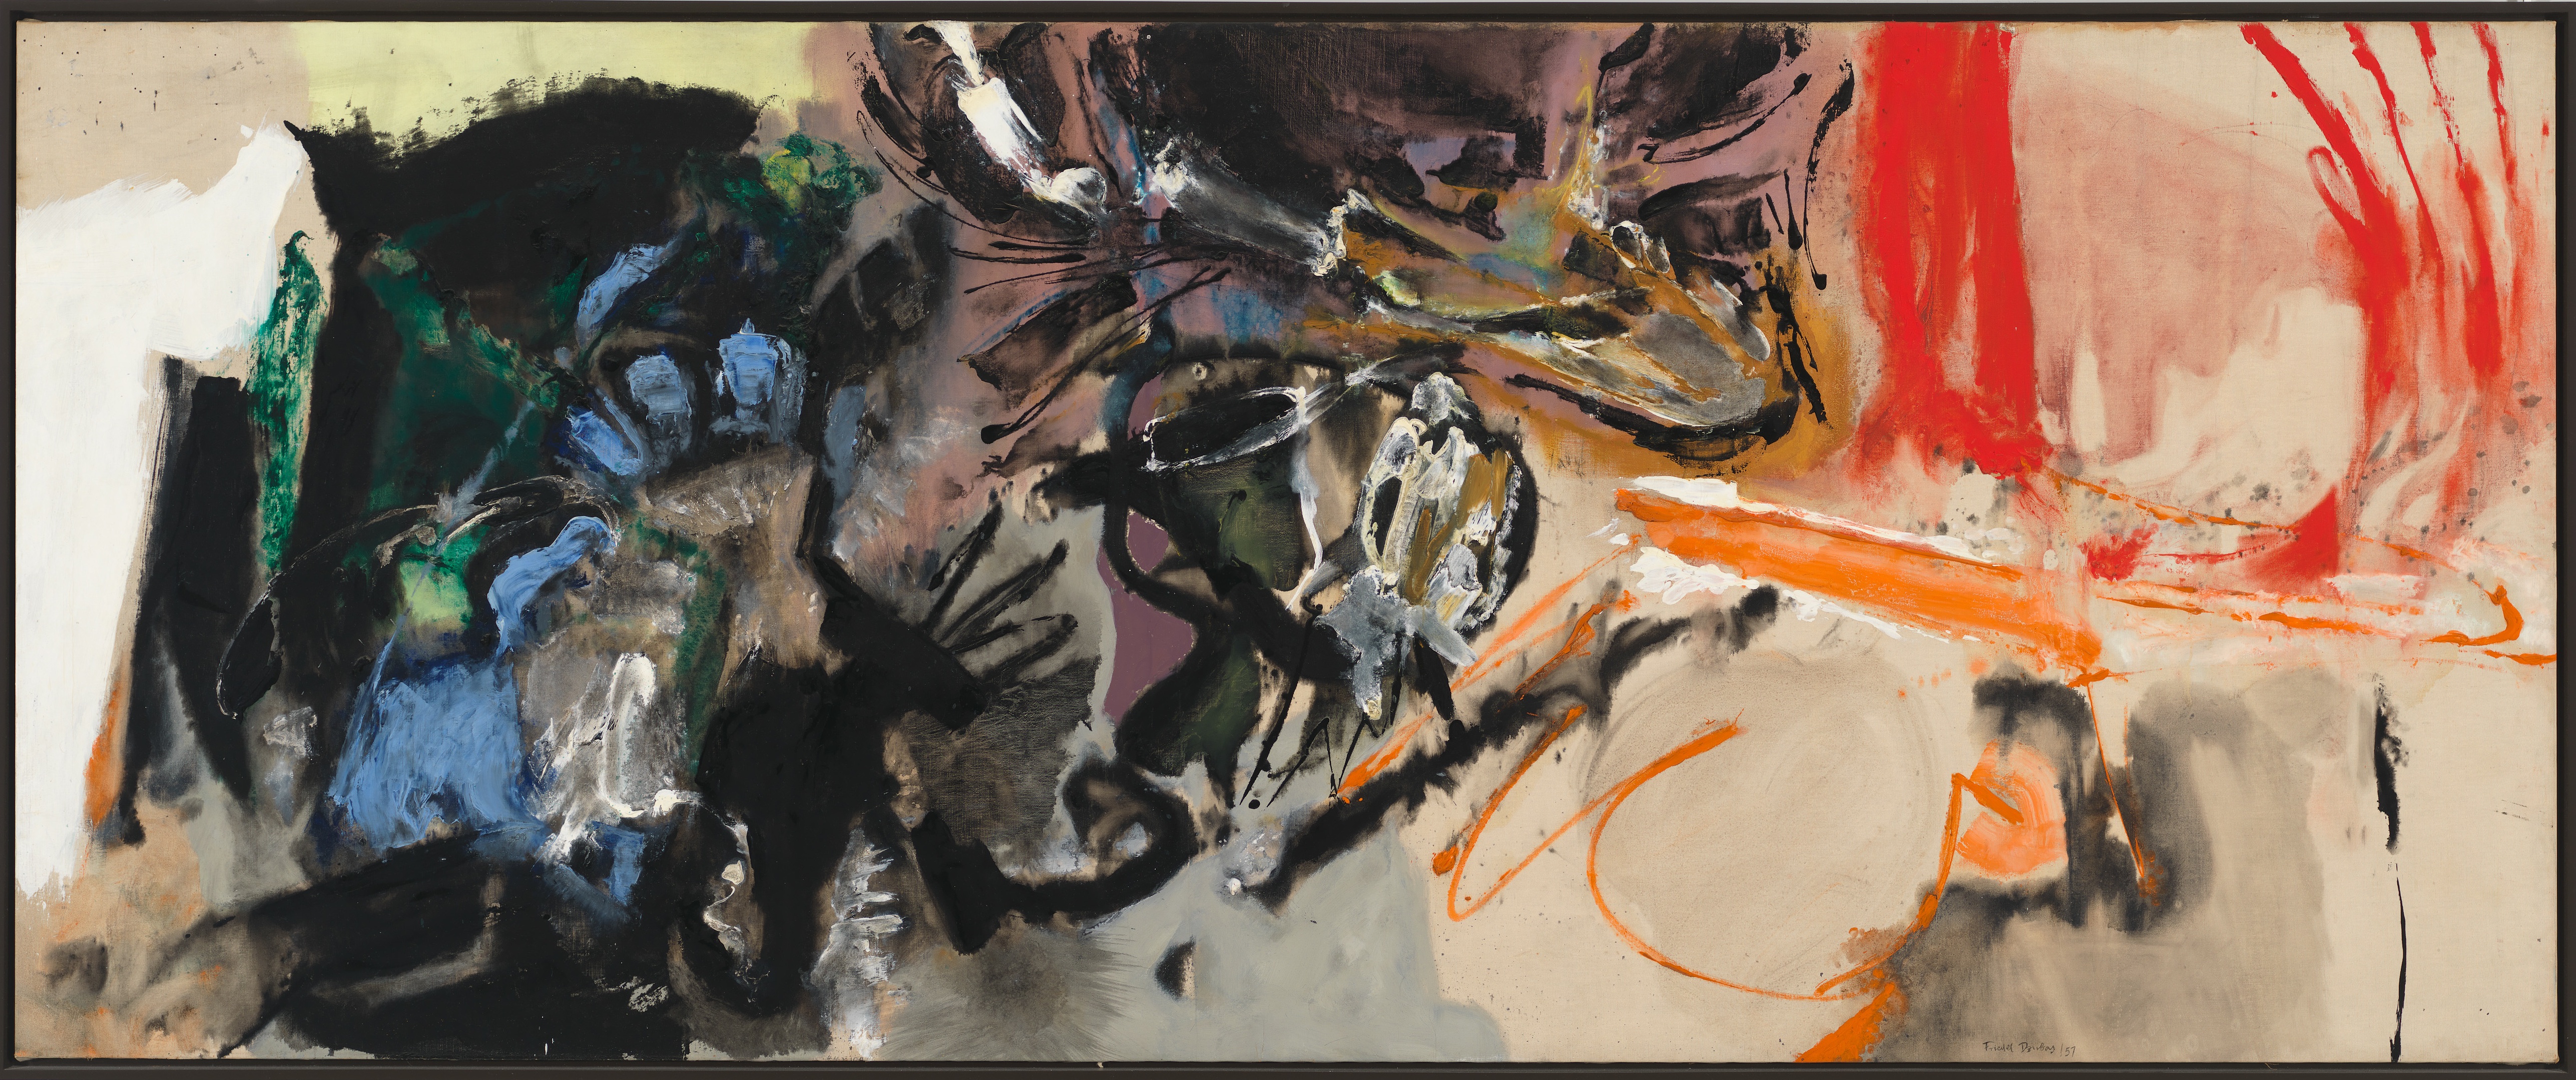 Figure 2 Yesterday, 1957 oil and enamel on canvas 44 11/16 x 109 1/8 in (113.05 x 276.86 cm) Whitney Museum of American Art 59.24 